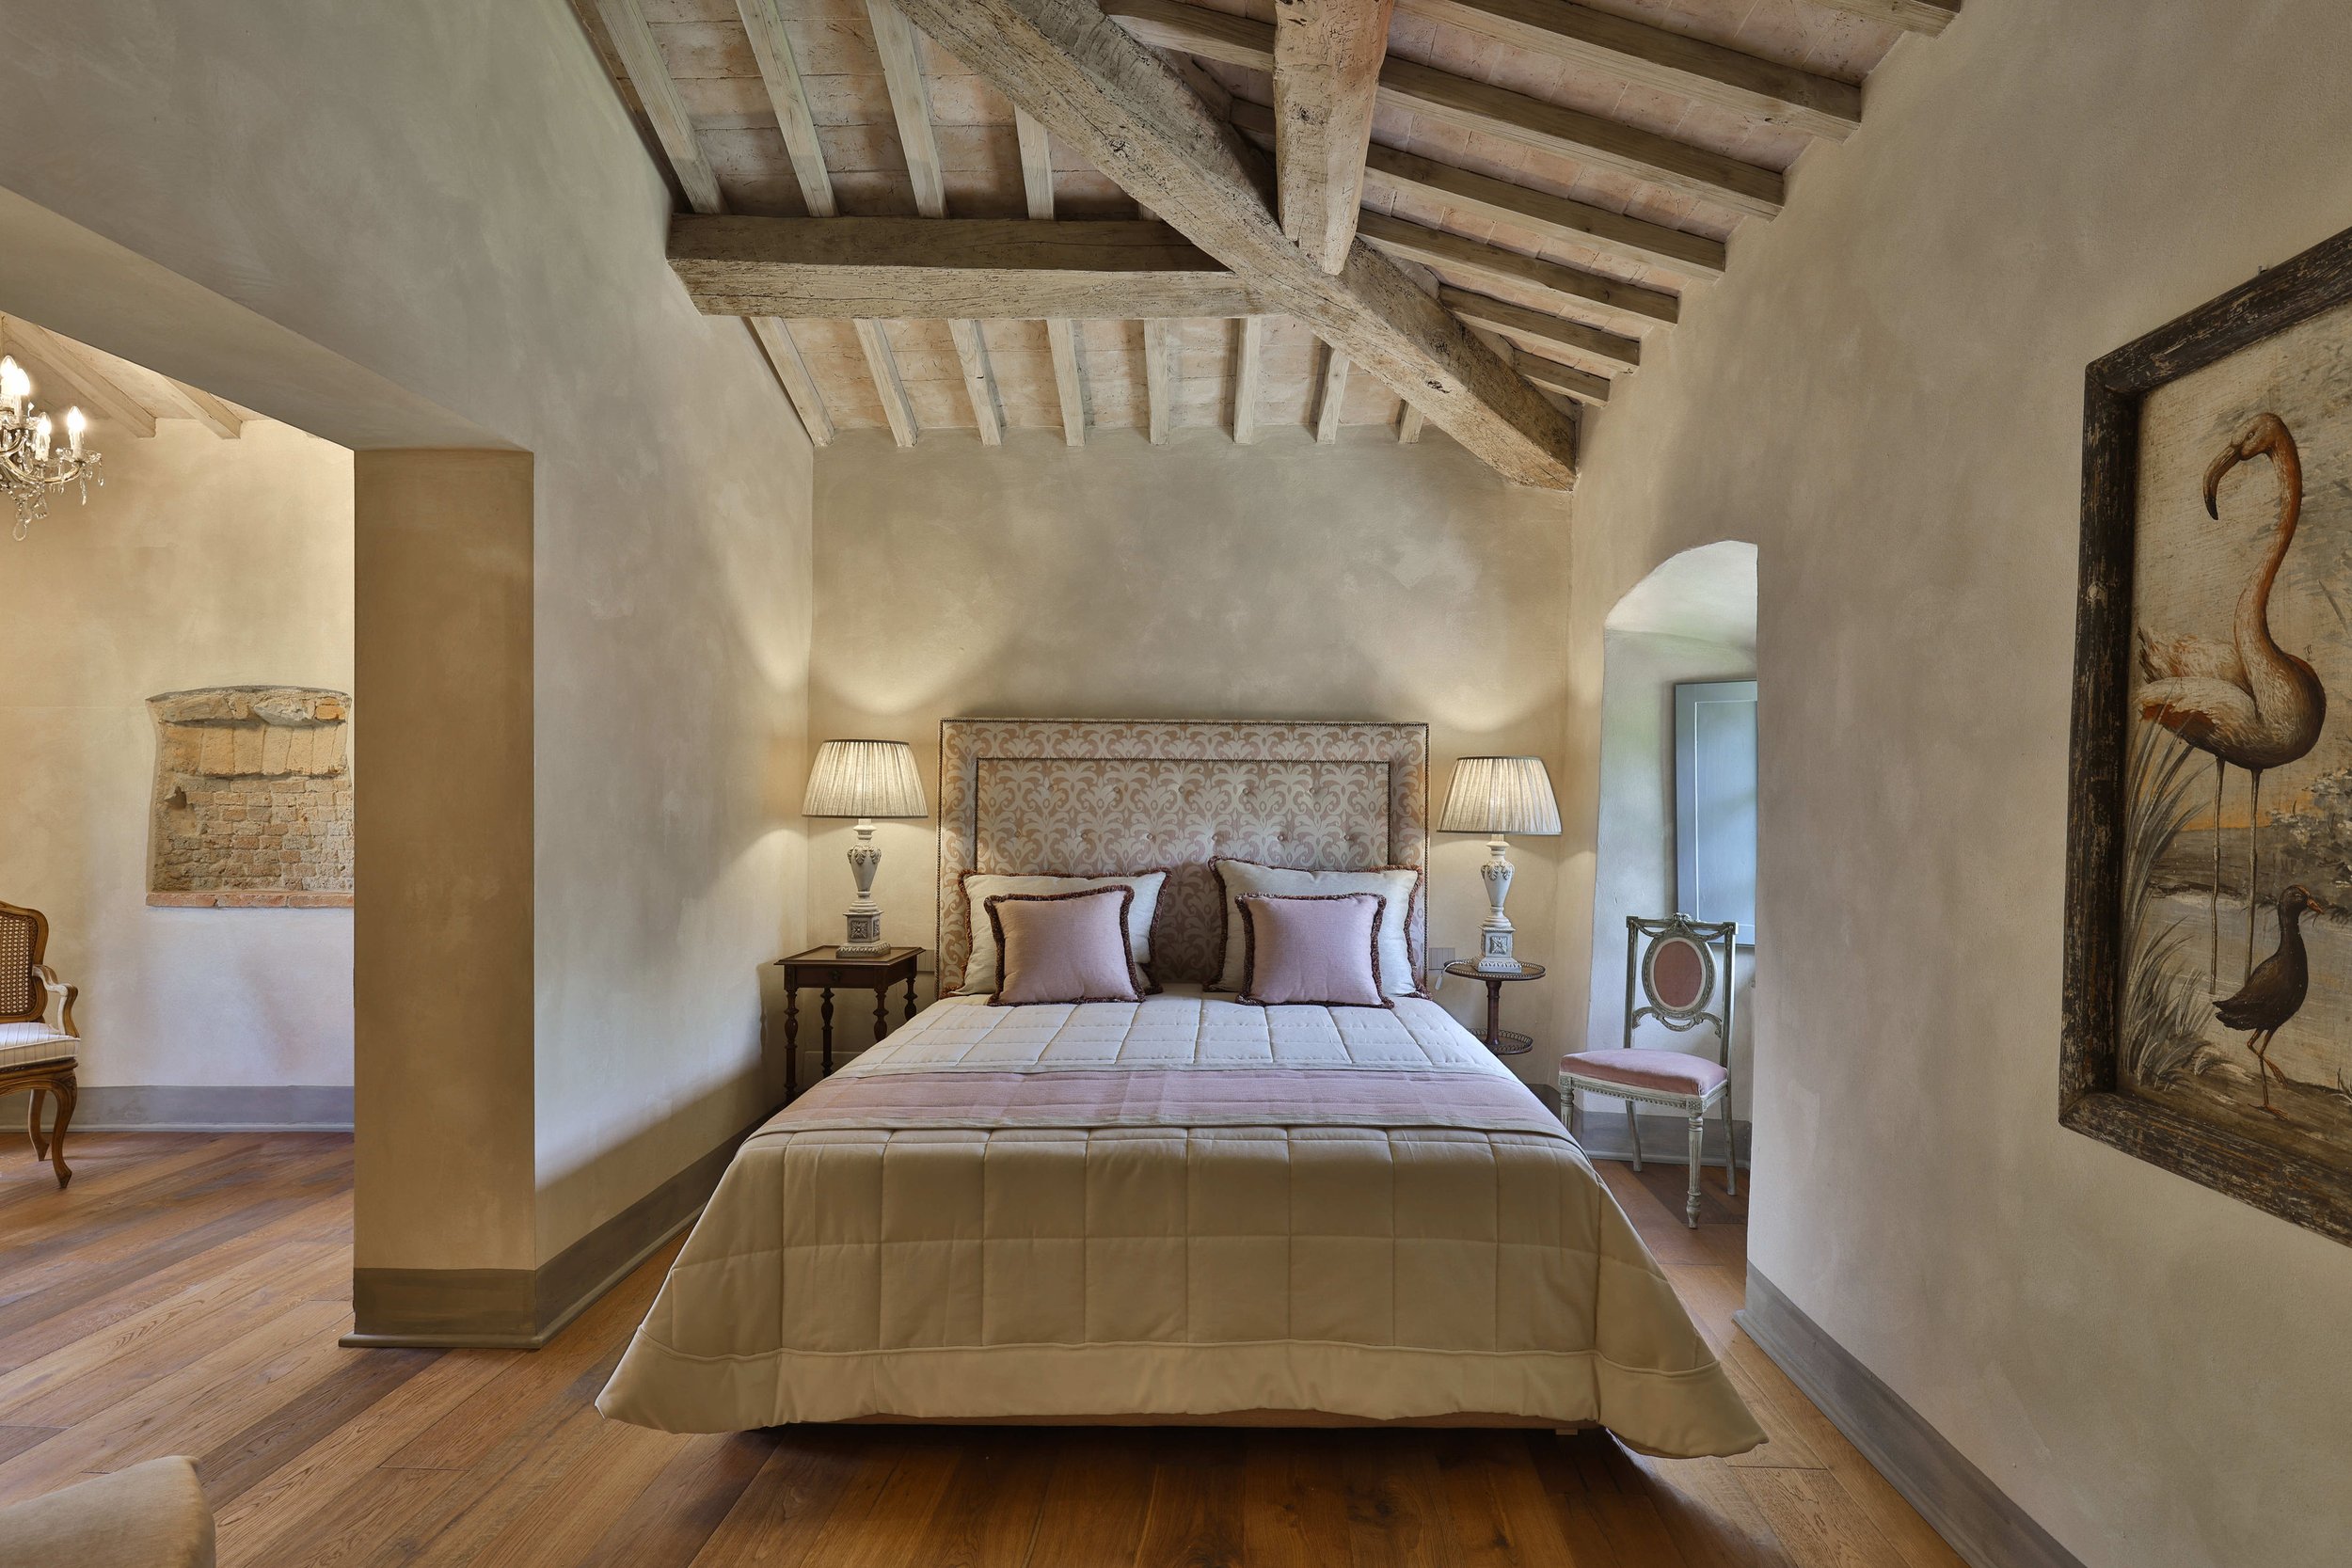 Francis York NEW Luxury Holiday Rental in the Chianti Hills, Tuscany Booking This Summer  12.jpg